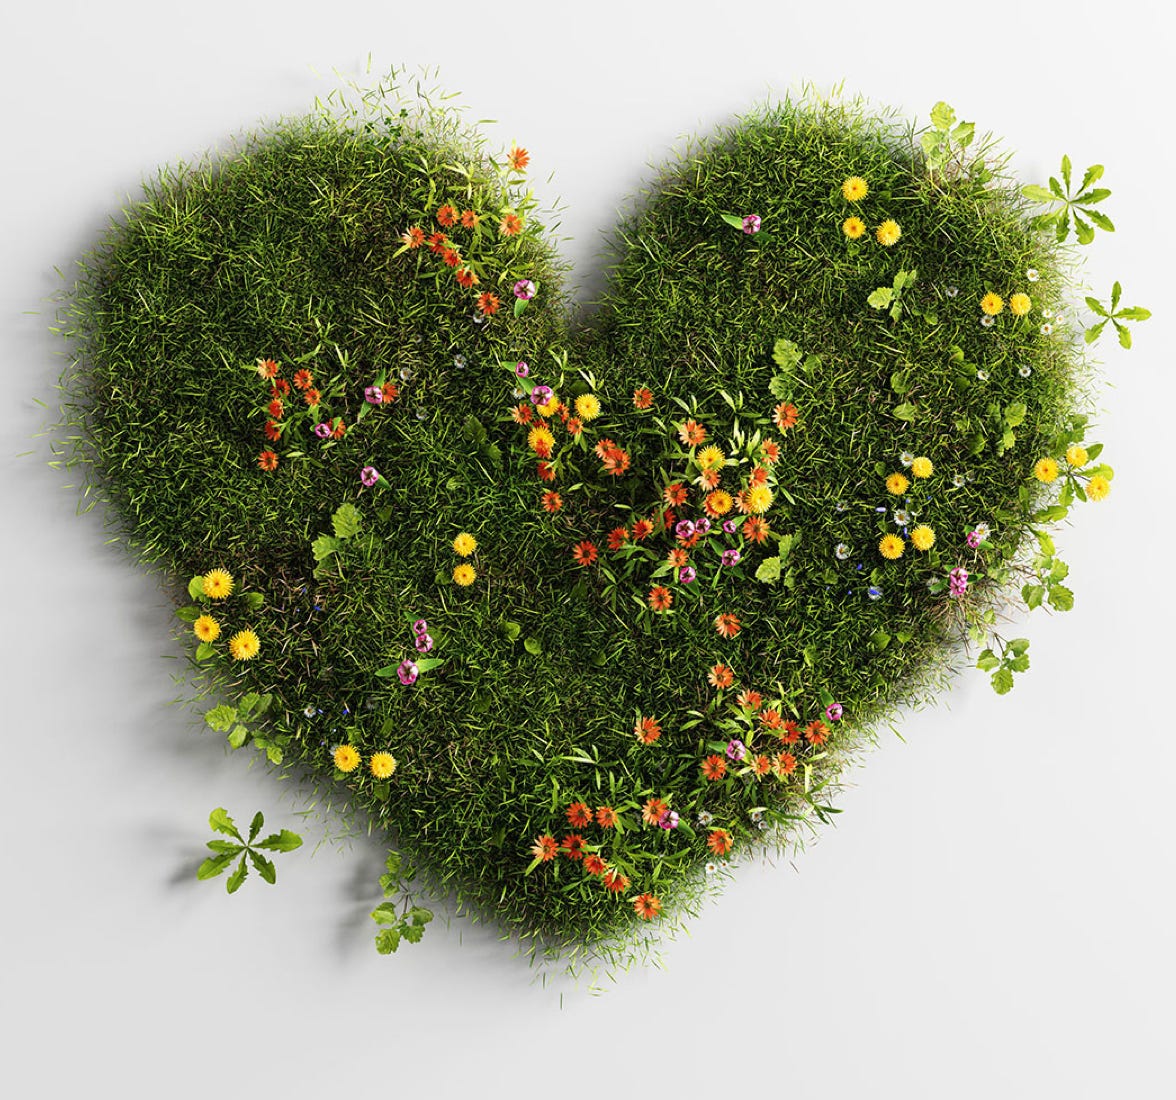 Grass Heart with flowers